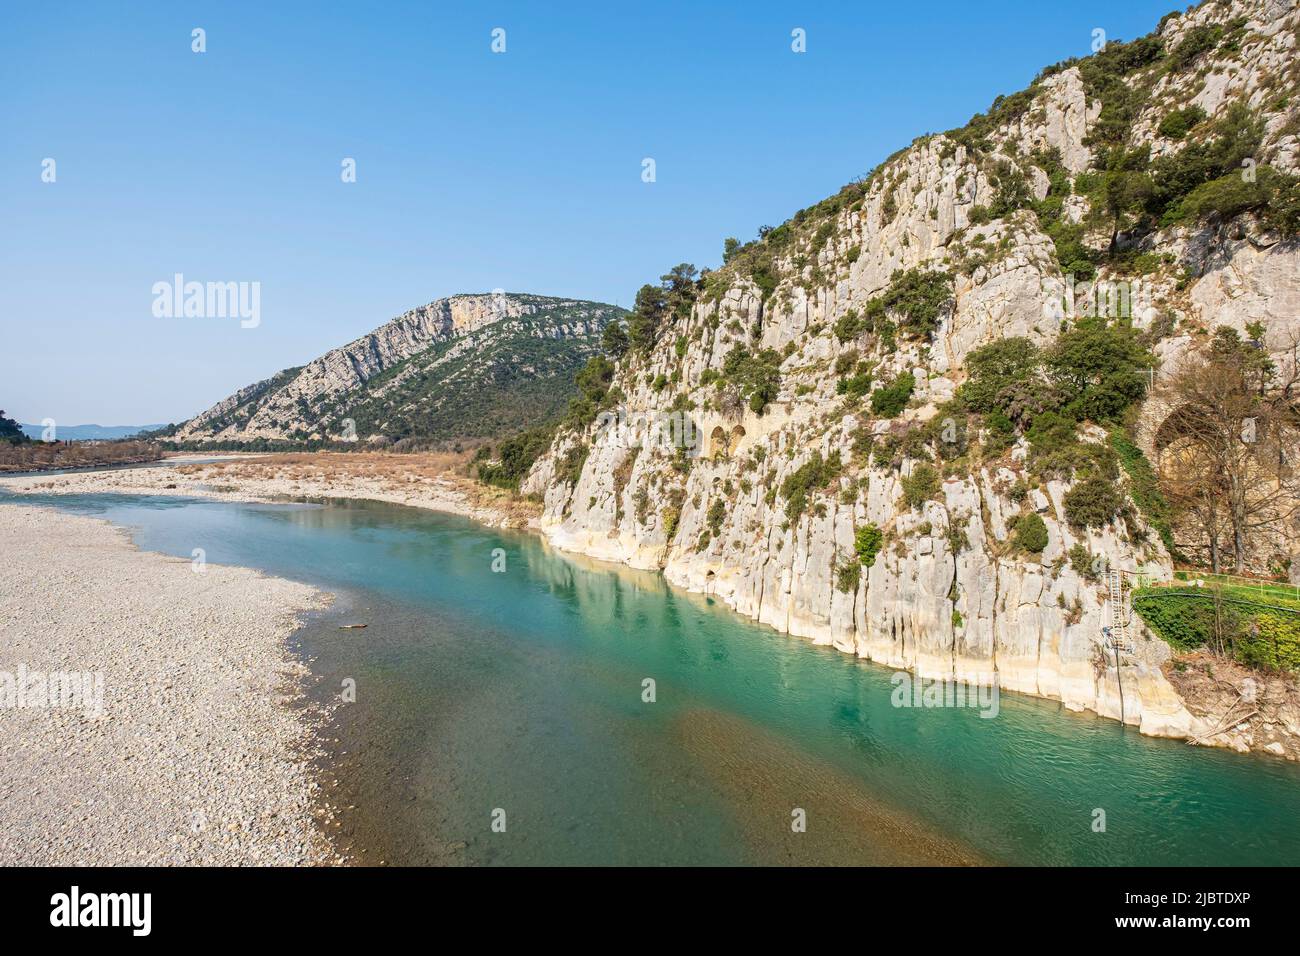 France, Vaucluse, Luberon Regional Natural Park, Mirabeau, the banks of the Durance river Stock Photo